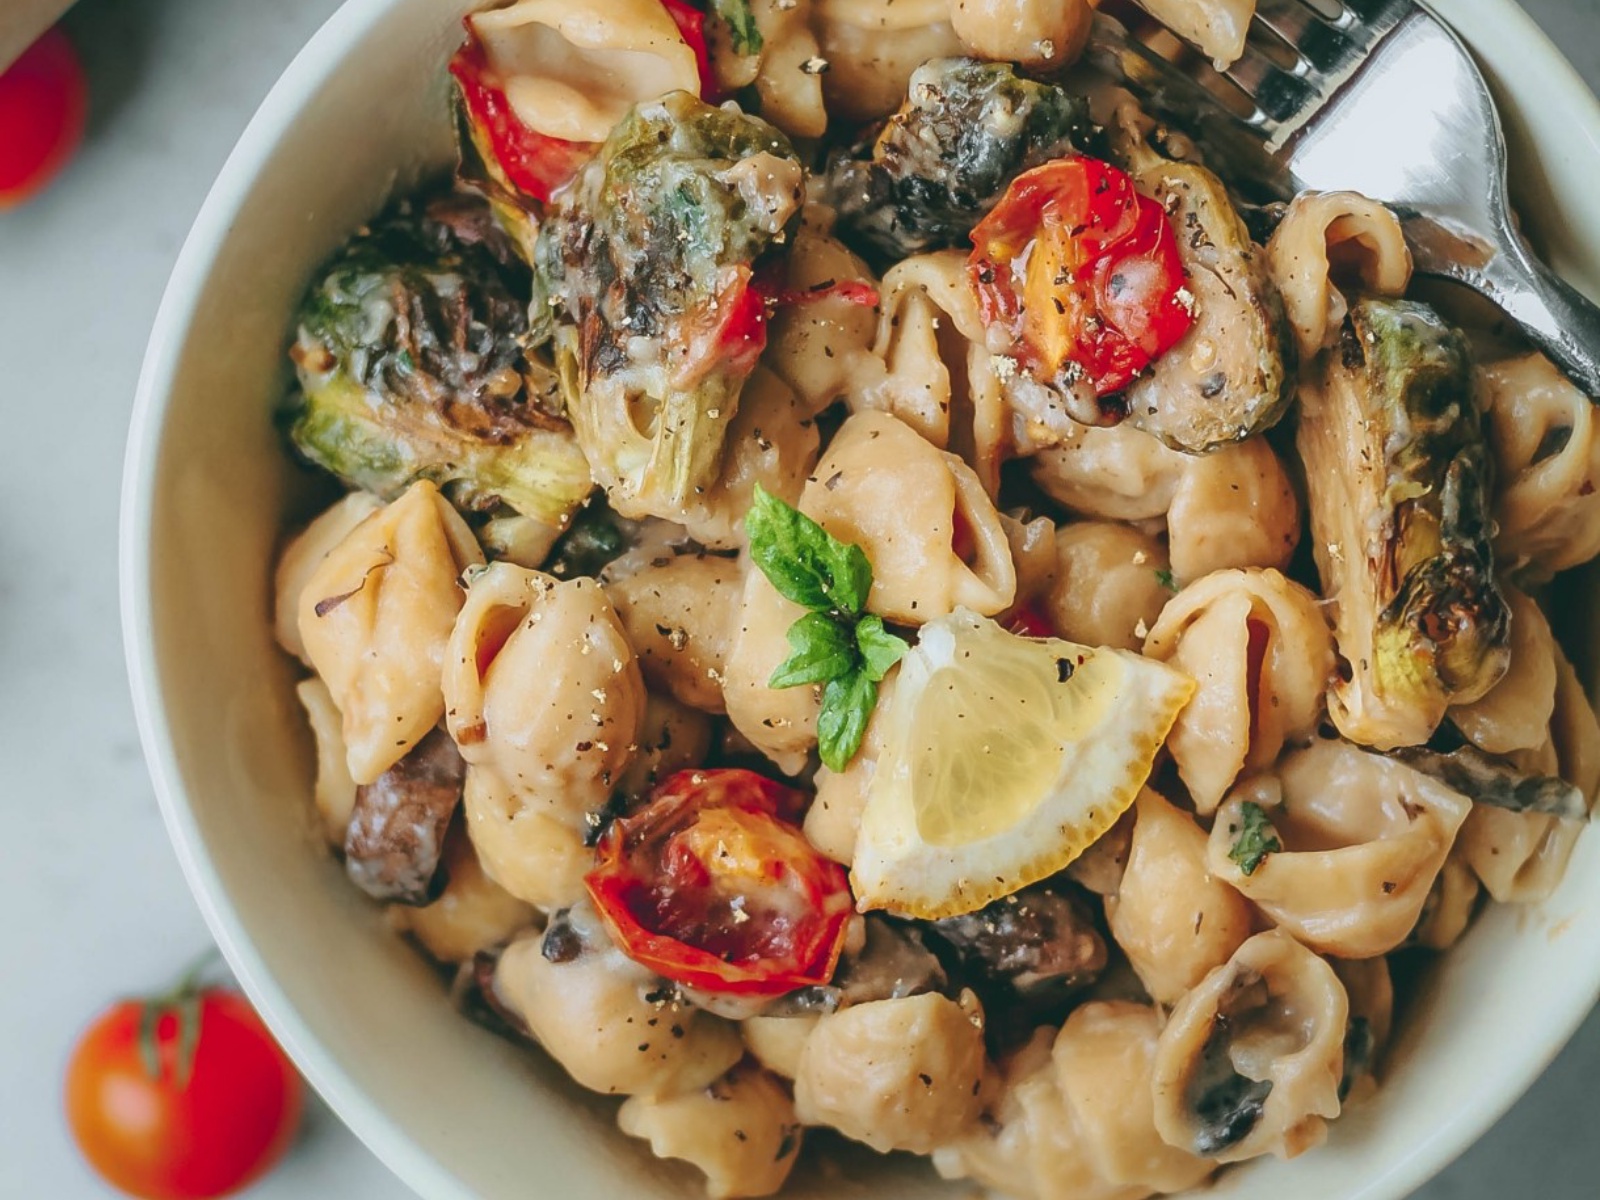 Vegan Creamy Garlic Pasta With Roasted Brussels Sprouts and Tomatoes